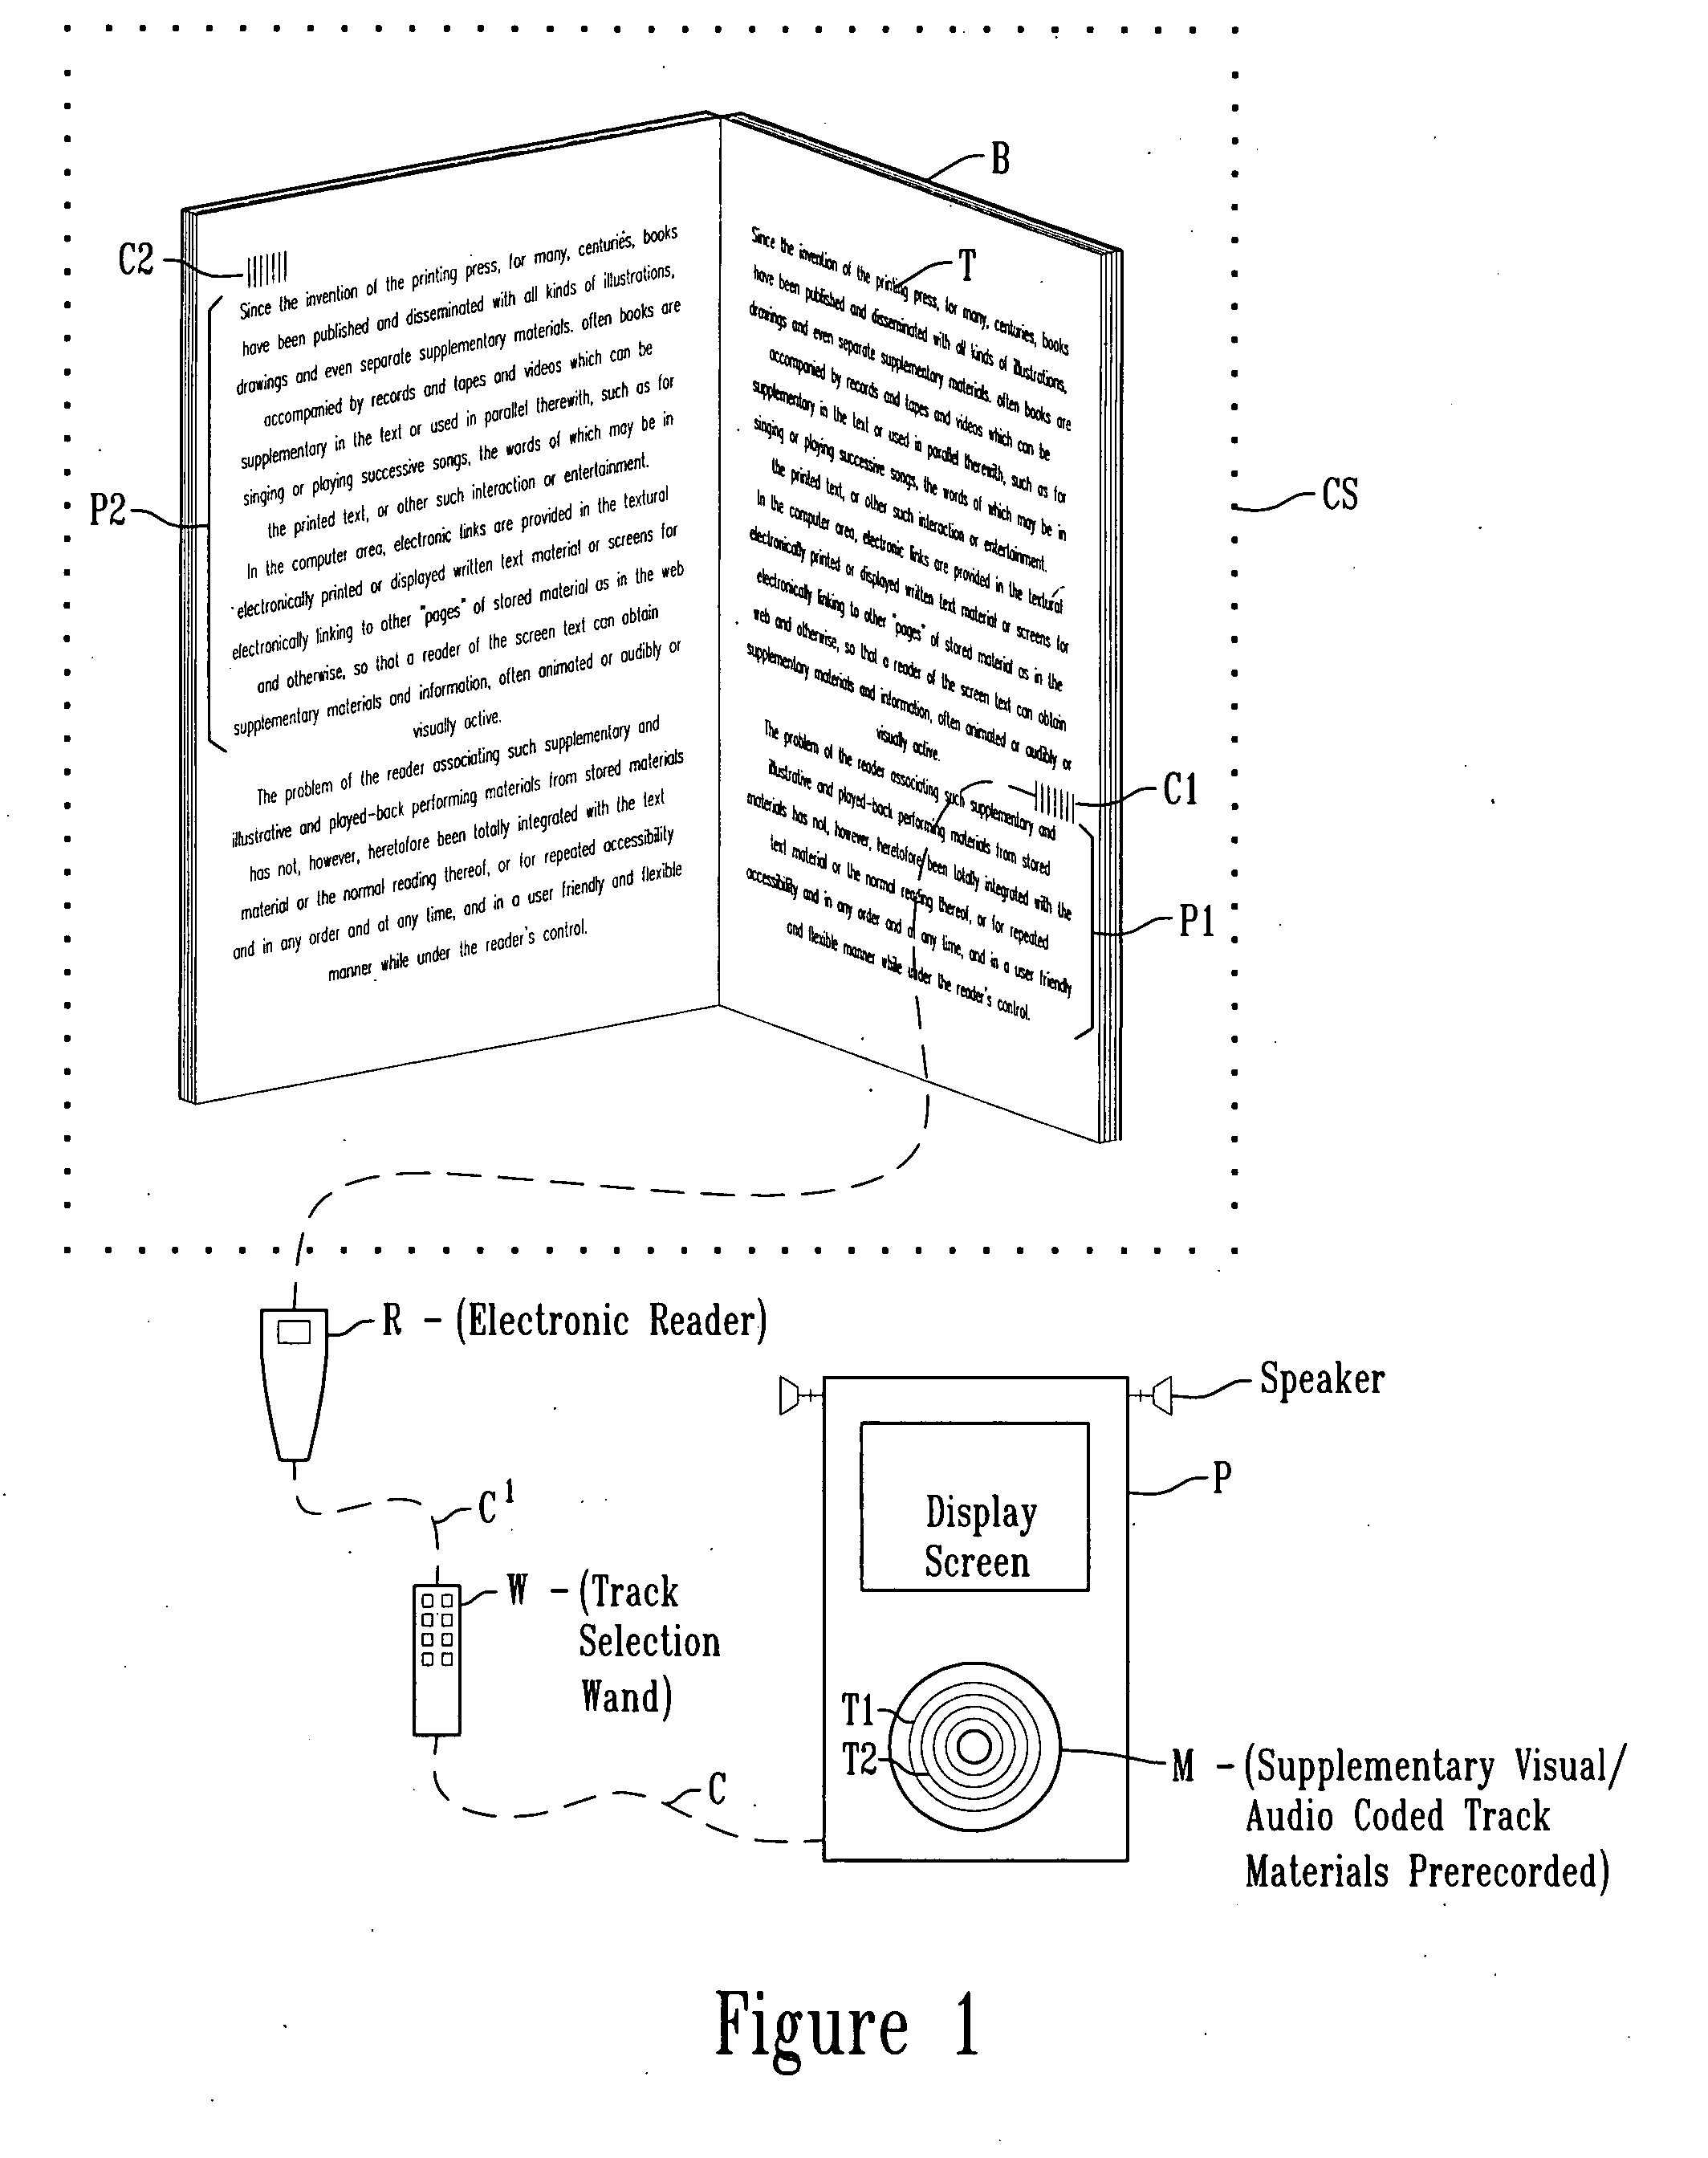 Method of and apparatus for supplementing the reading of selected passages of printed material in a book or the like by electronically reading coded indicia provided in the book at such passages to access the playing of corresponding coded tracks of pre-recorded video/audio supplemental material respectively related to the selected passages